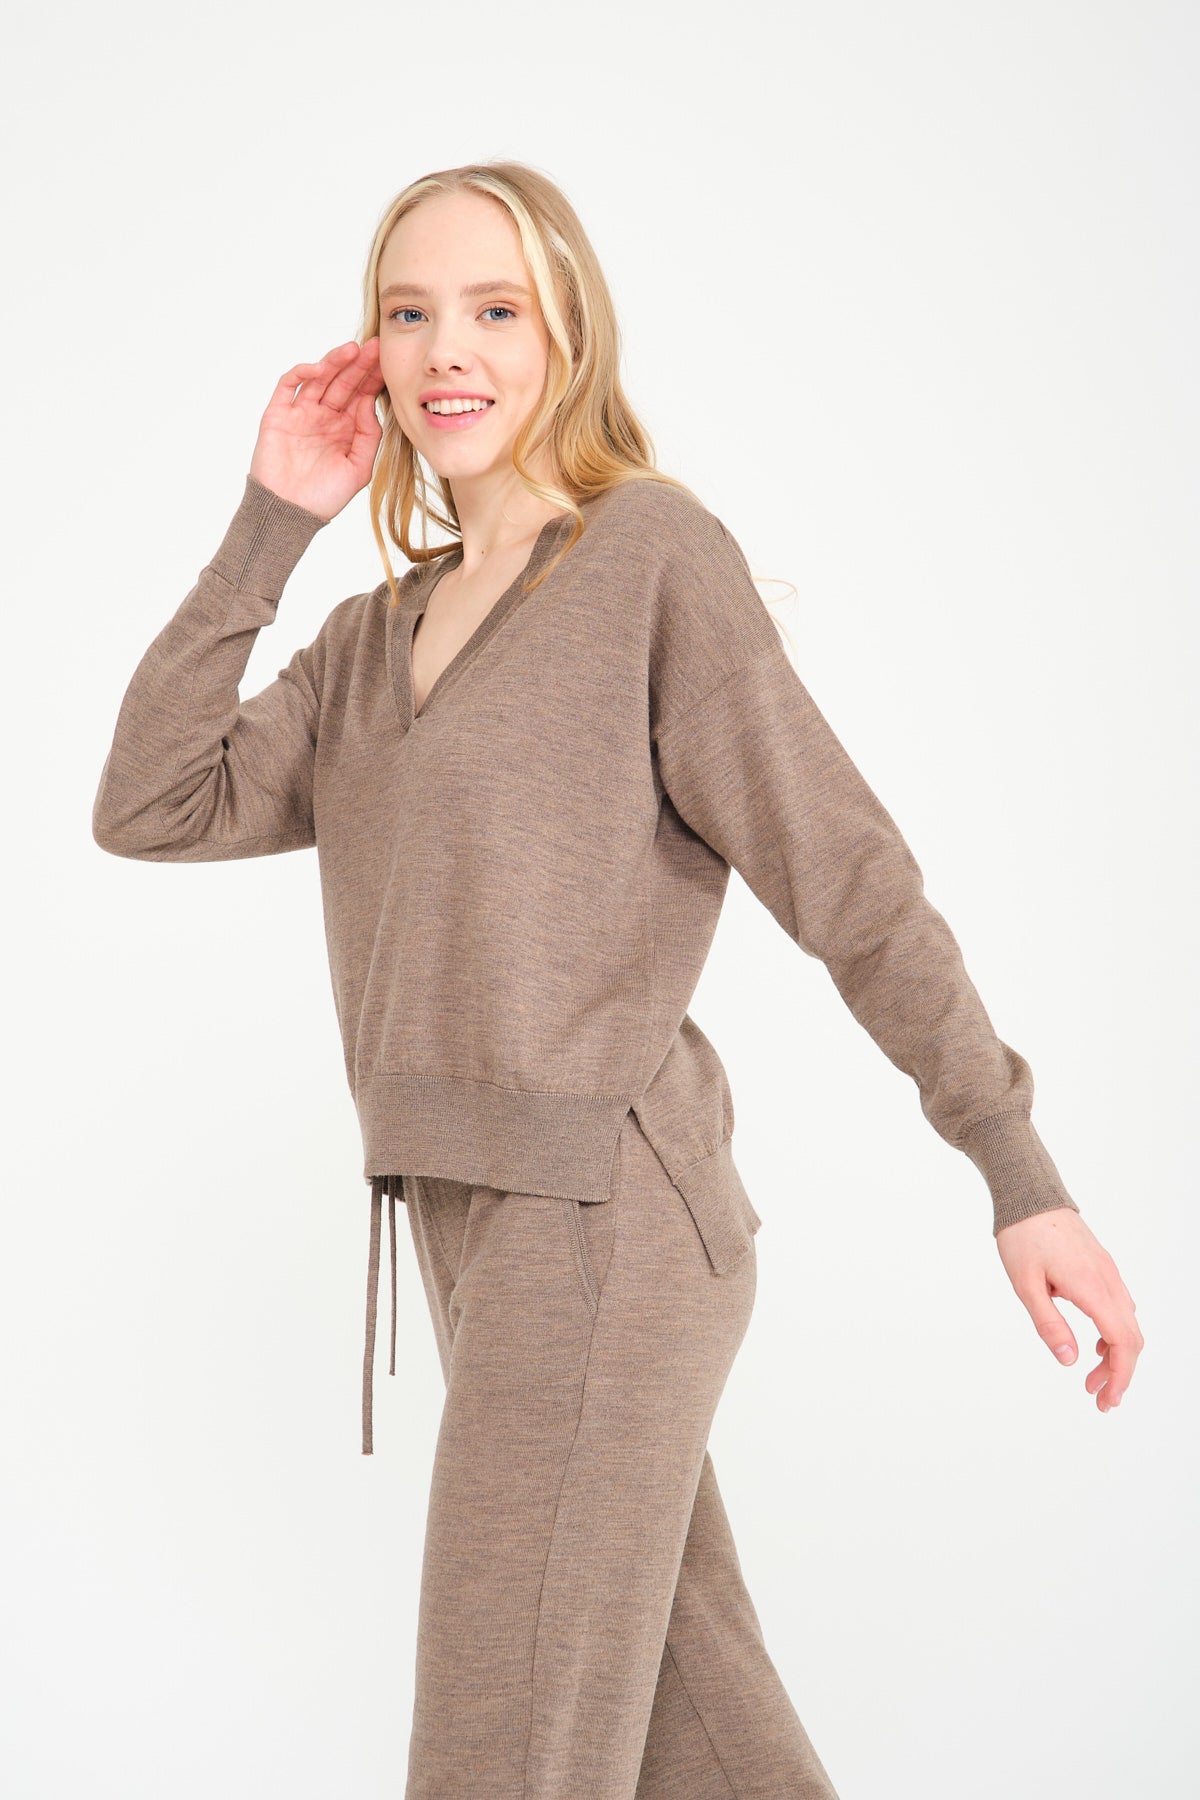 Women's Knitwear Sets, The Most Comfortable Knitwear Sets are on 